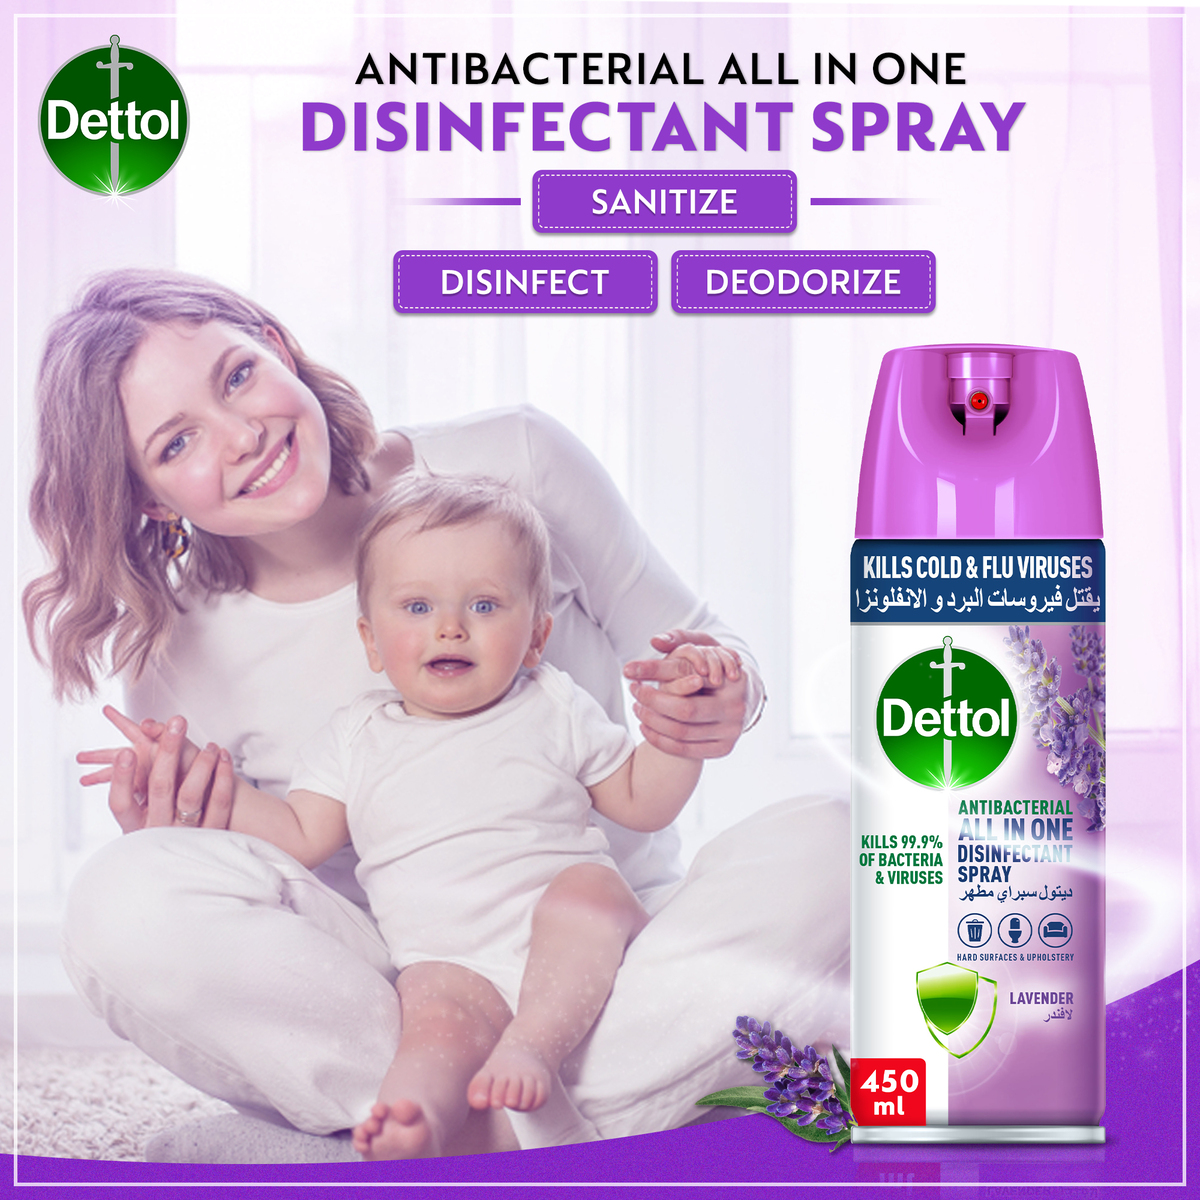 Dettol Lavender Antibacterial All in One Disinfectant Spray 450ml